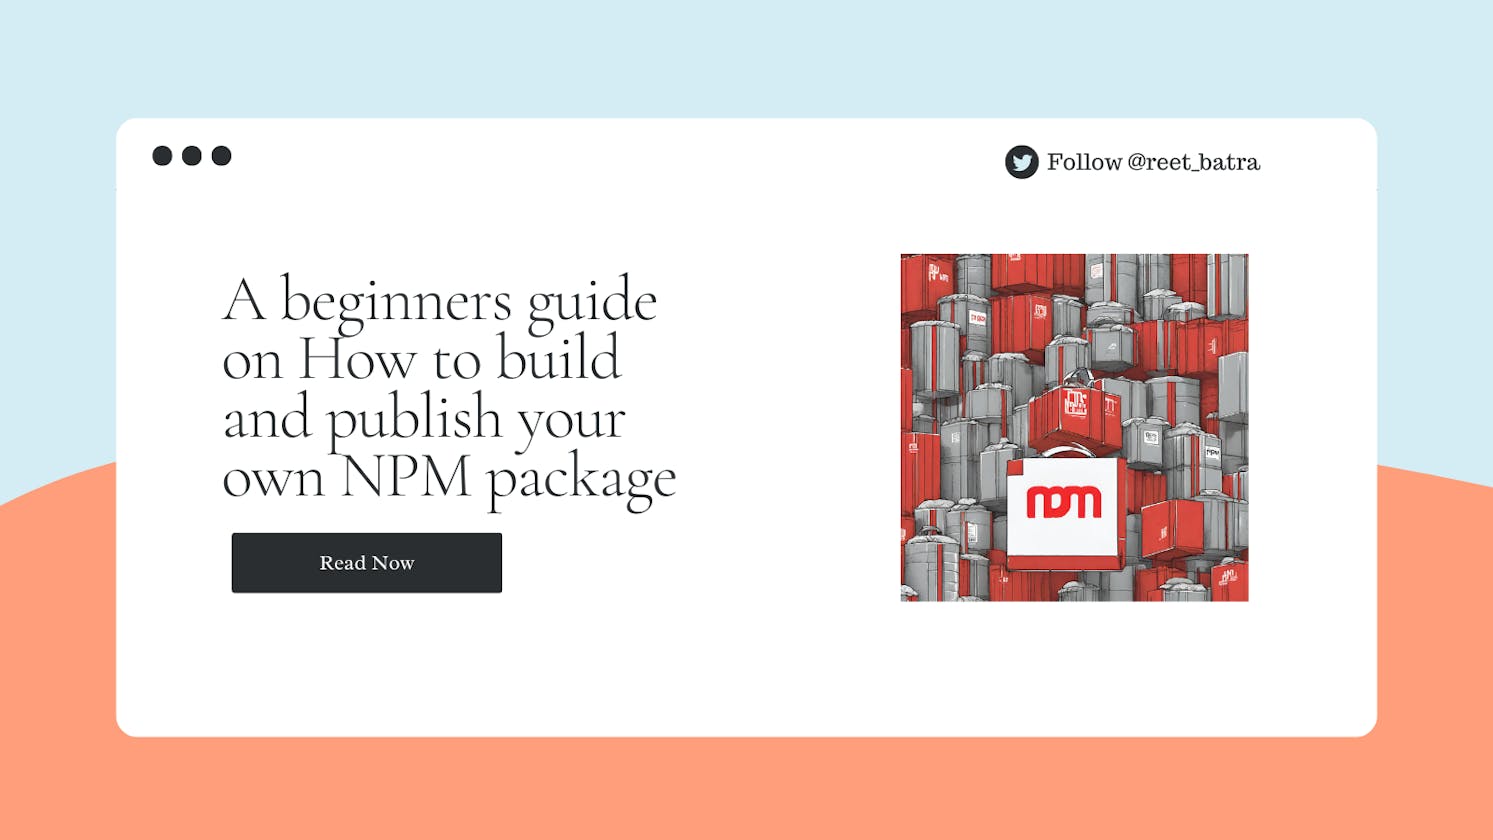 A beginners guide on How to build and publish your own NPM package